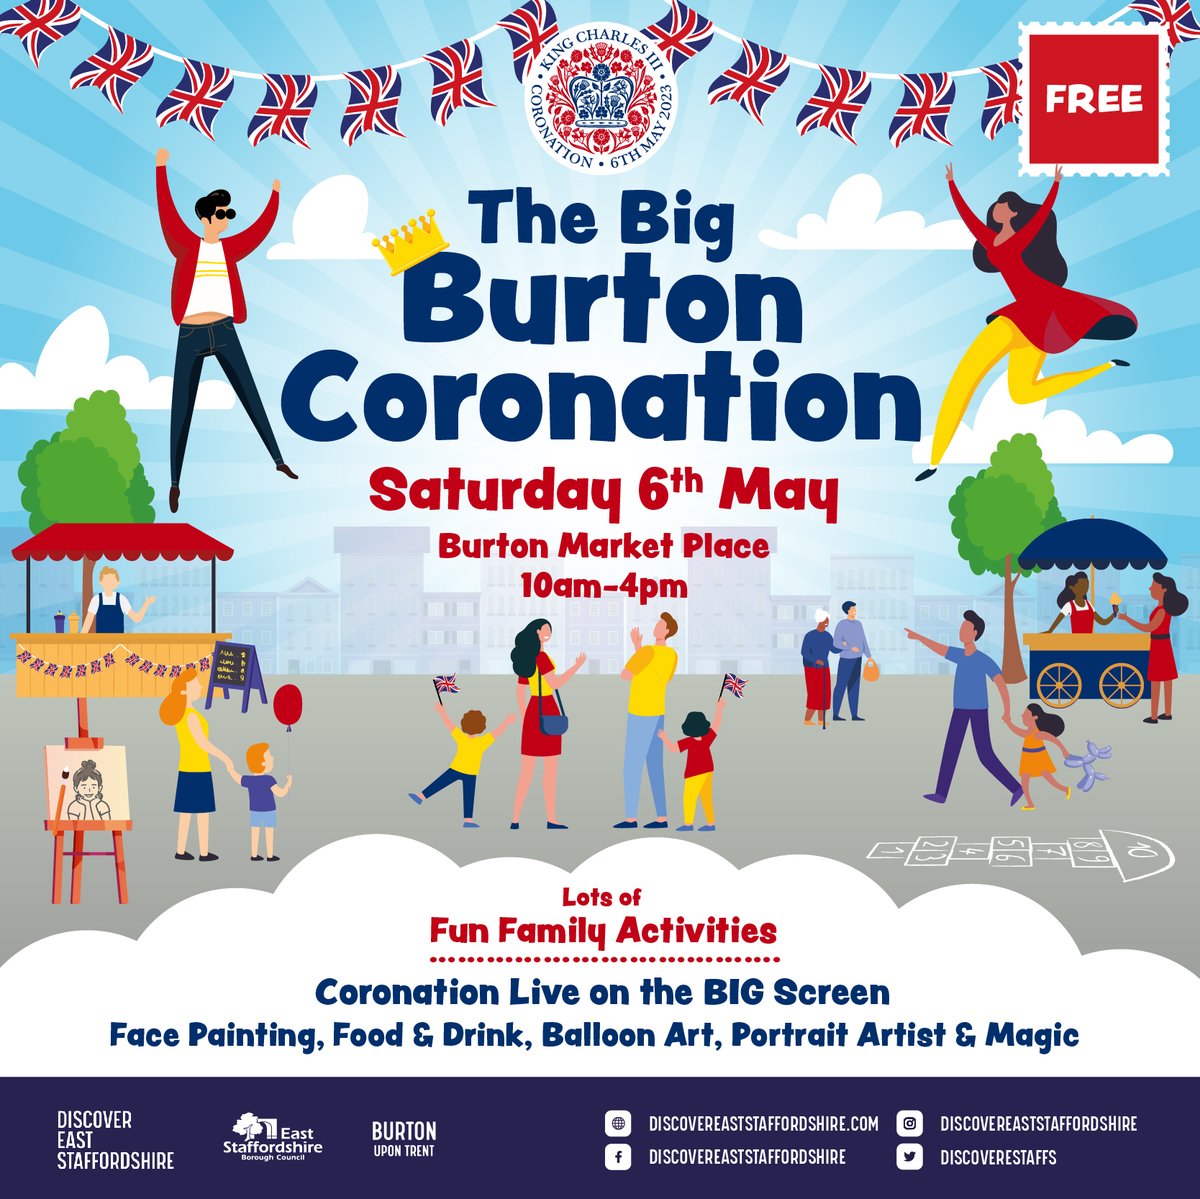 This Saturday, 6th May, The Big Burton Coronation comes to The Market Place. Enjoy a whole host of family activities, plus watch the Coronation coverage live on the big screen.

More here 👉   orlo.uk/4EvY0

#Coronation
#ThinkBurton
#BurtonuponTrent